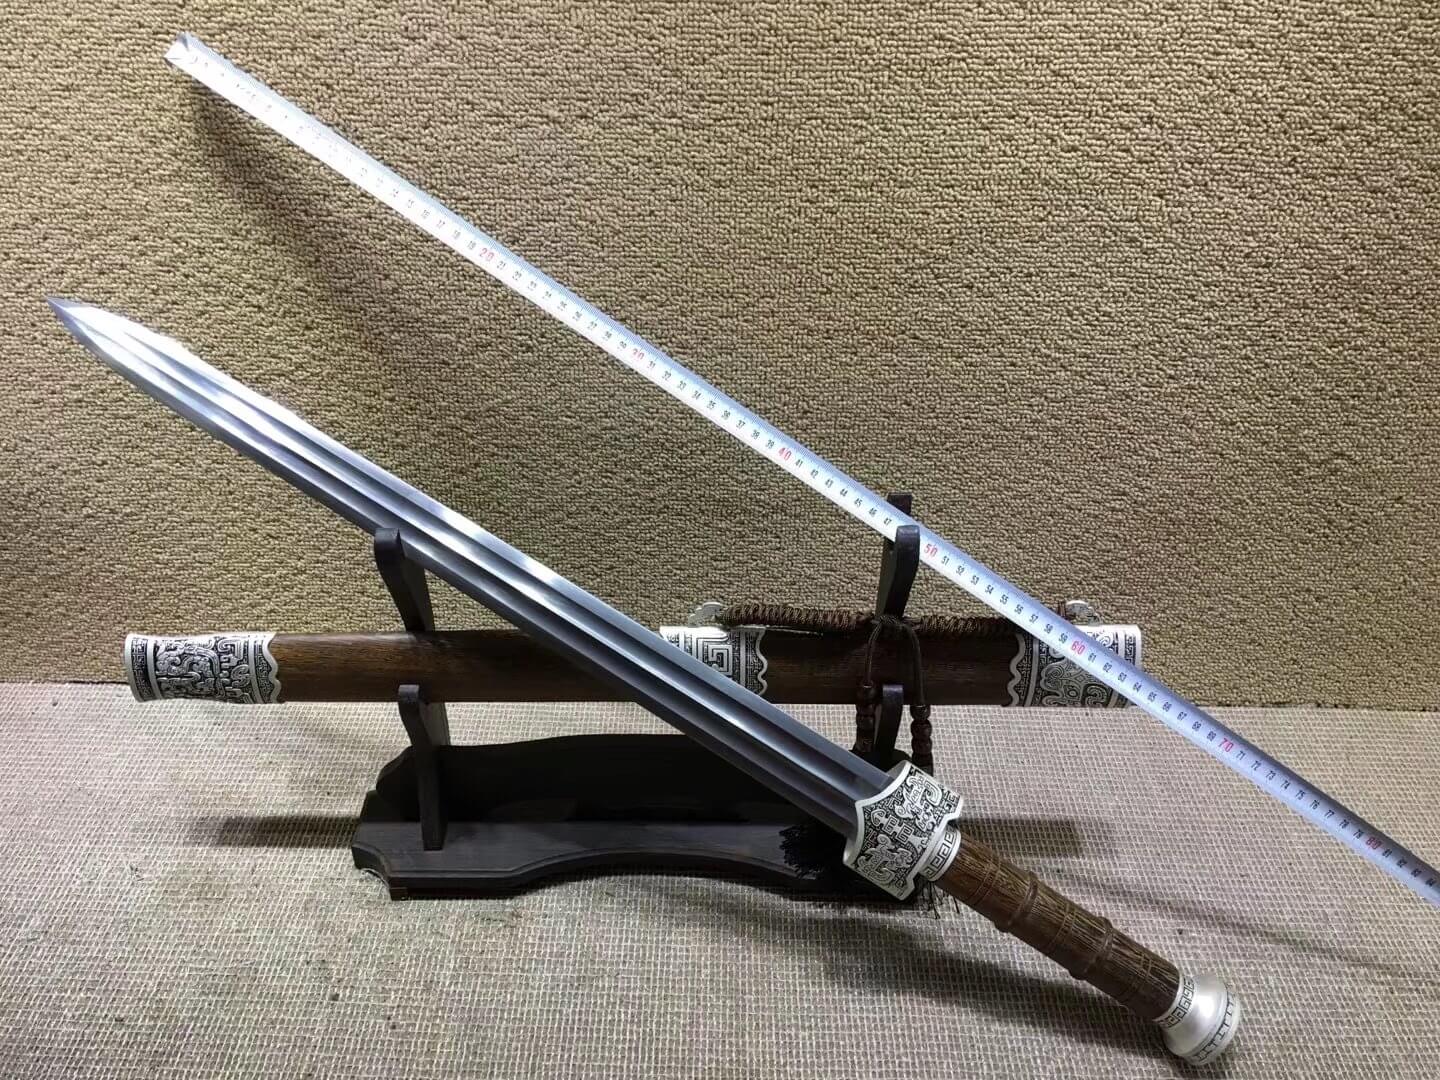 Yuewang sword(Folded steel blade,Rosewood scabbard,Alloy fitted)Length 32" - Chinese sword shop